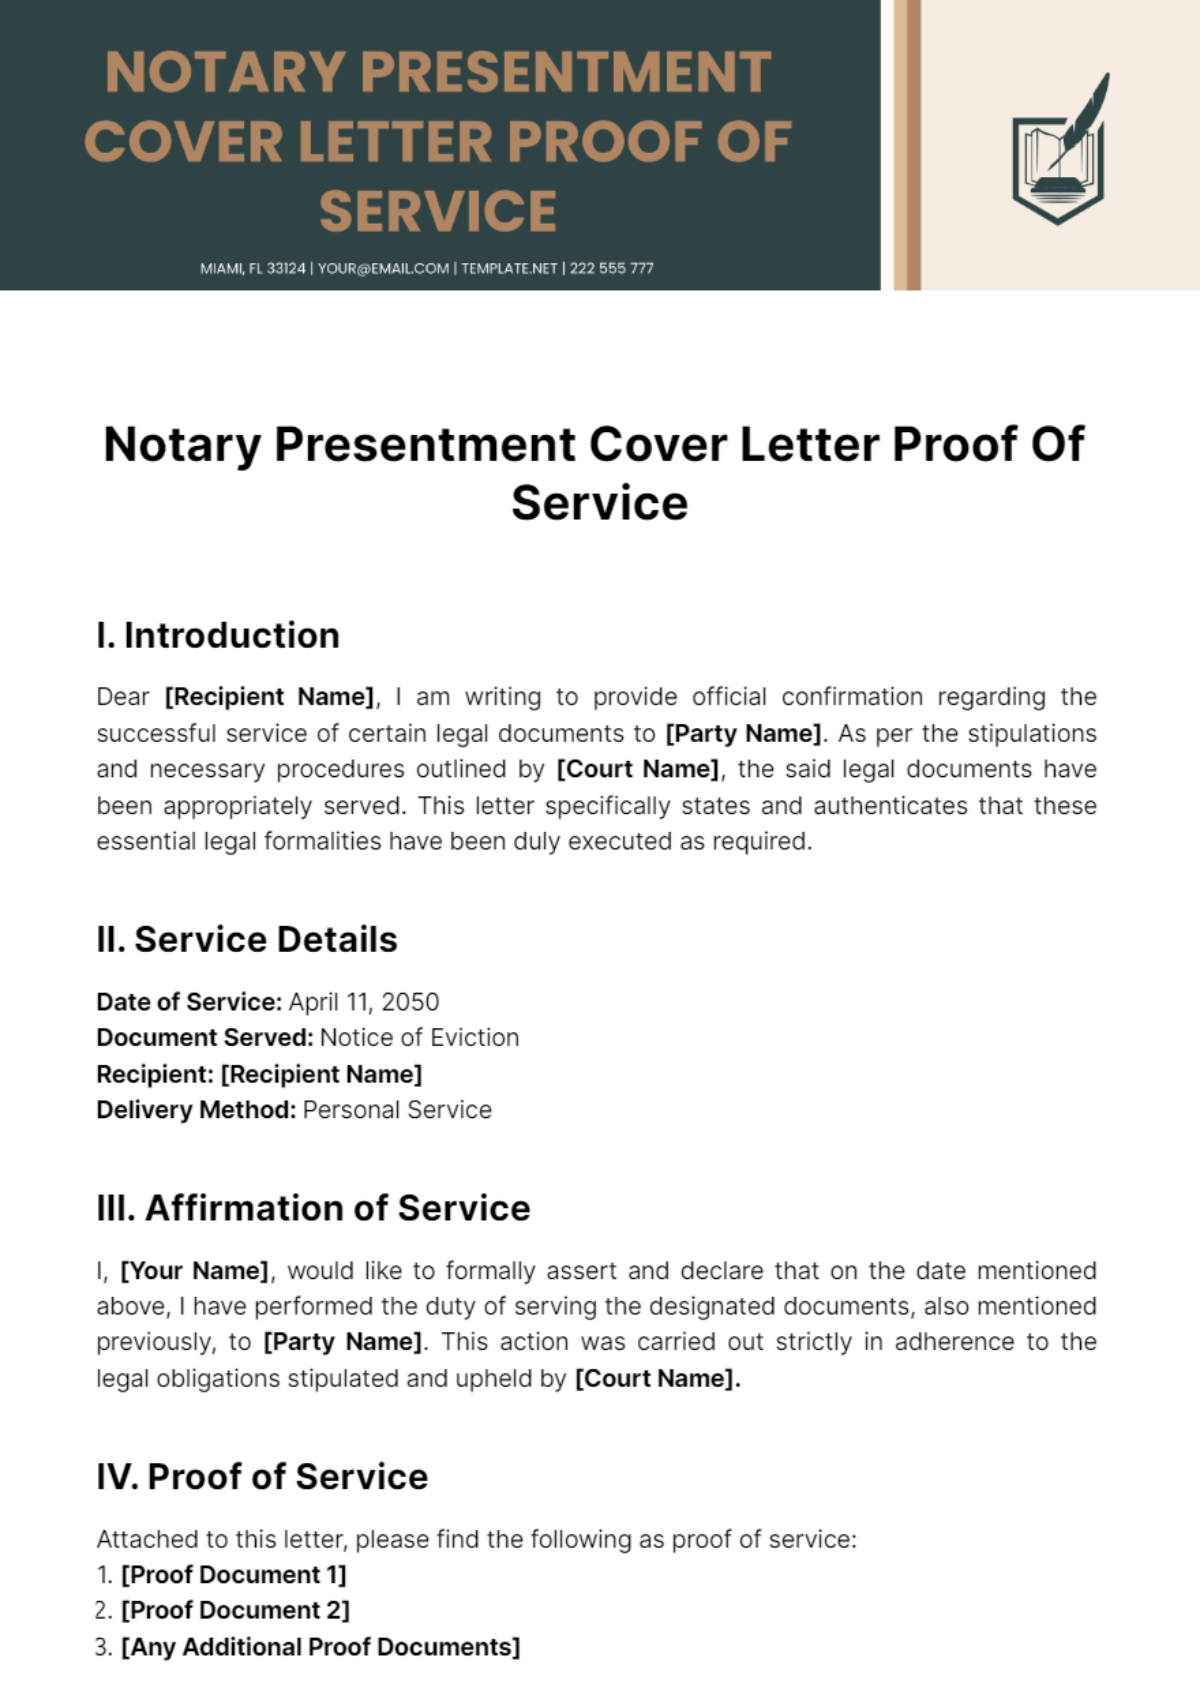 Free Notary Presentment Cover Letter Proof Of Service Template